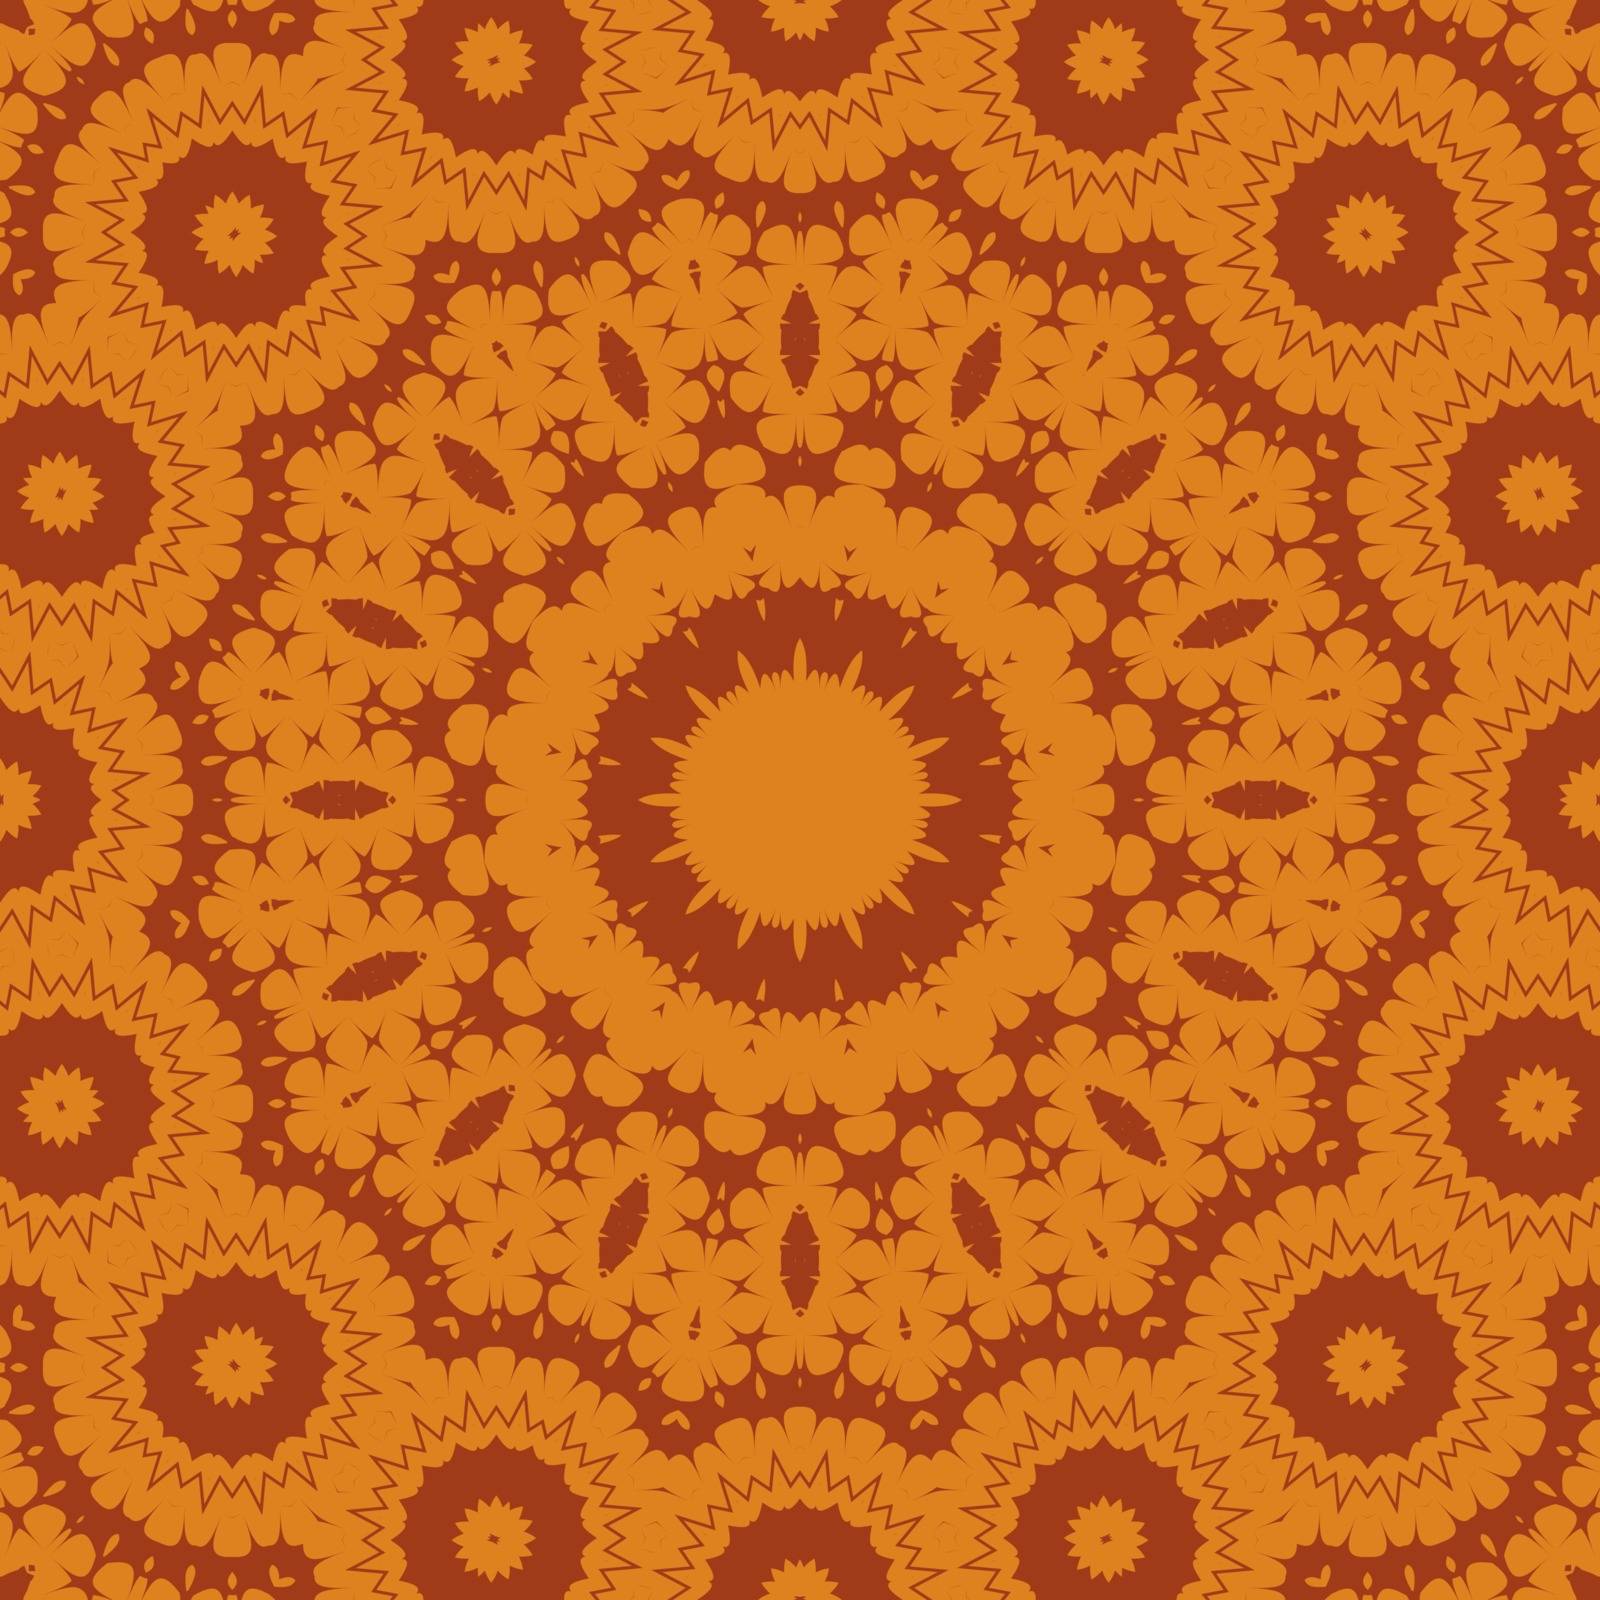 Ornamental seamless pattern - circles with linear ornaments.